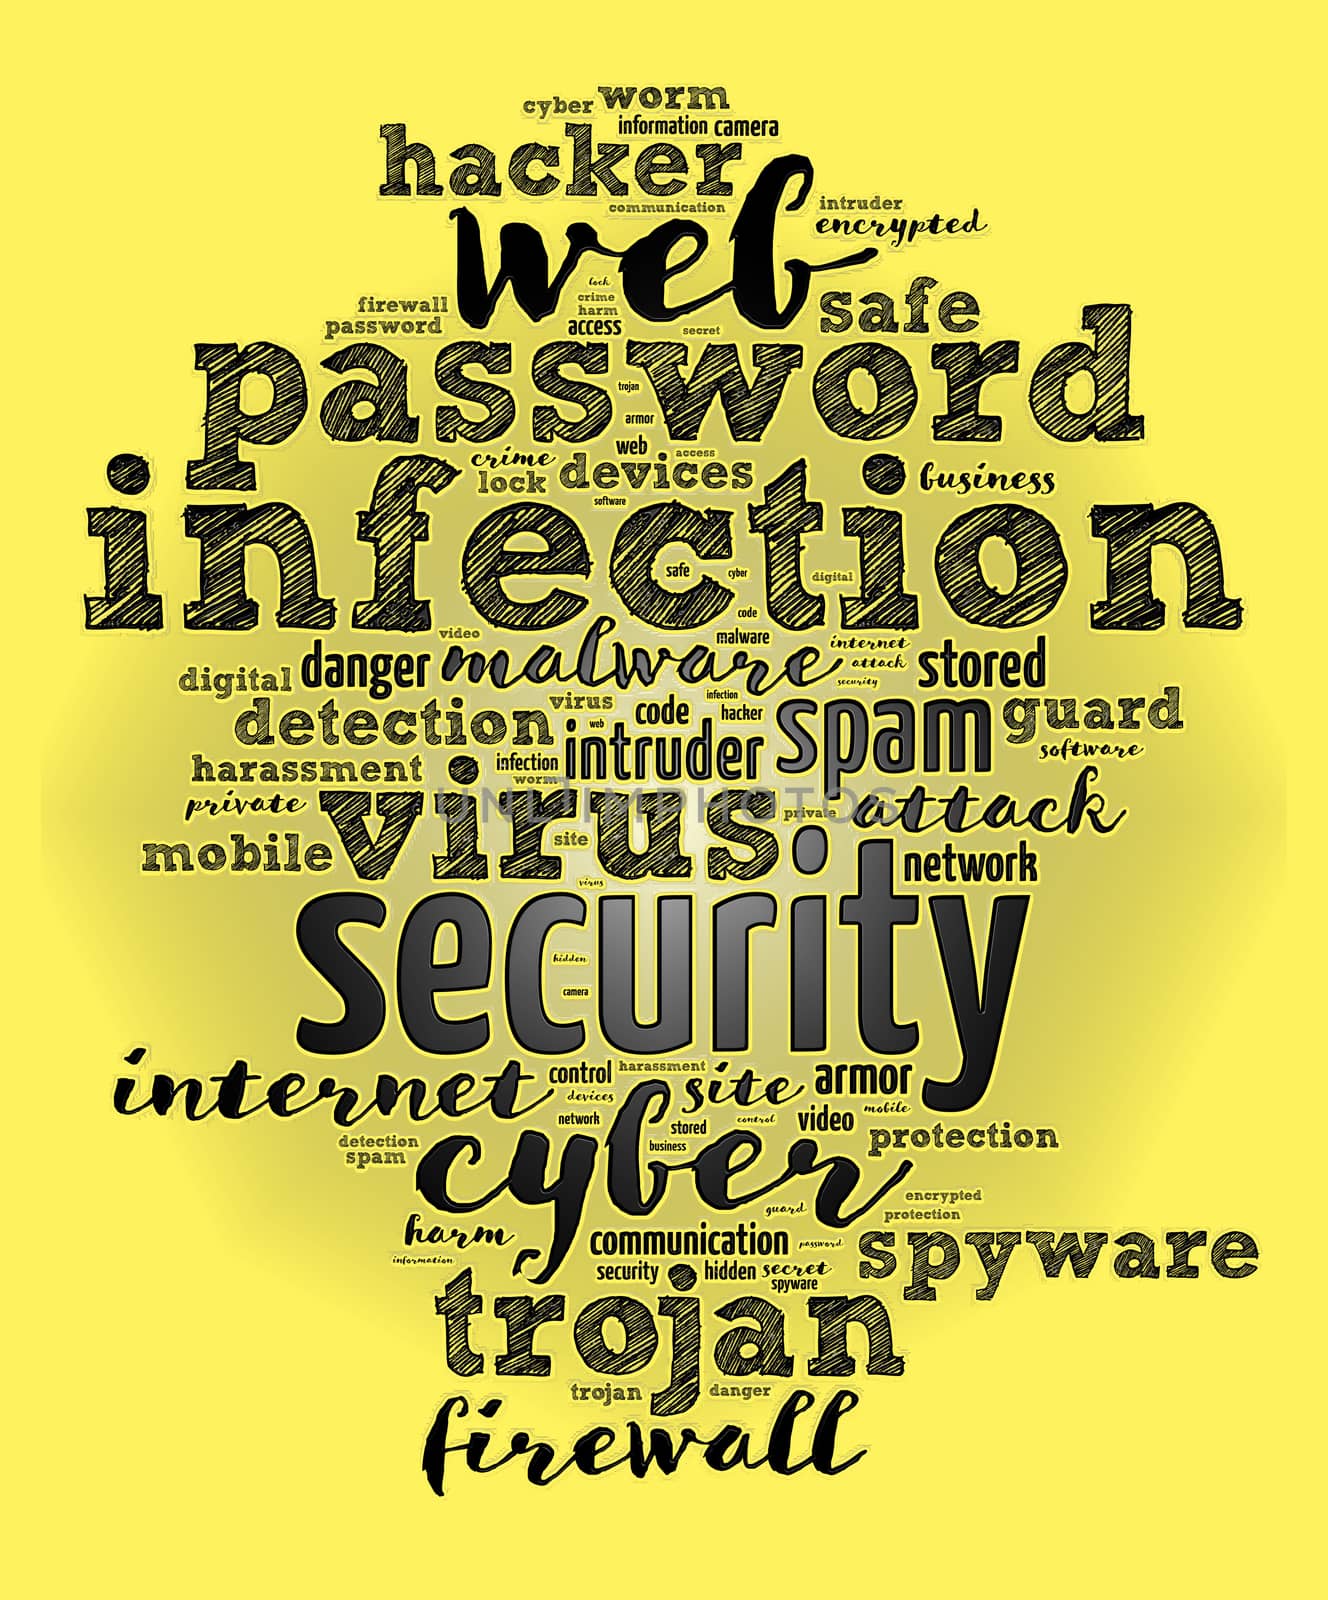 Security word cloud concept over white background